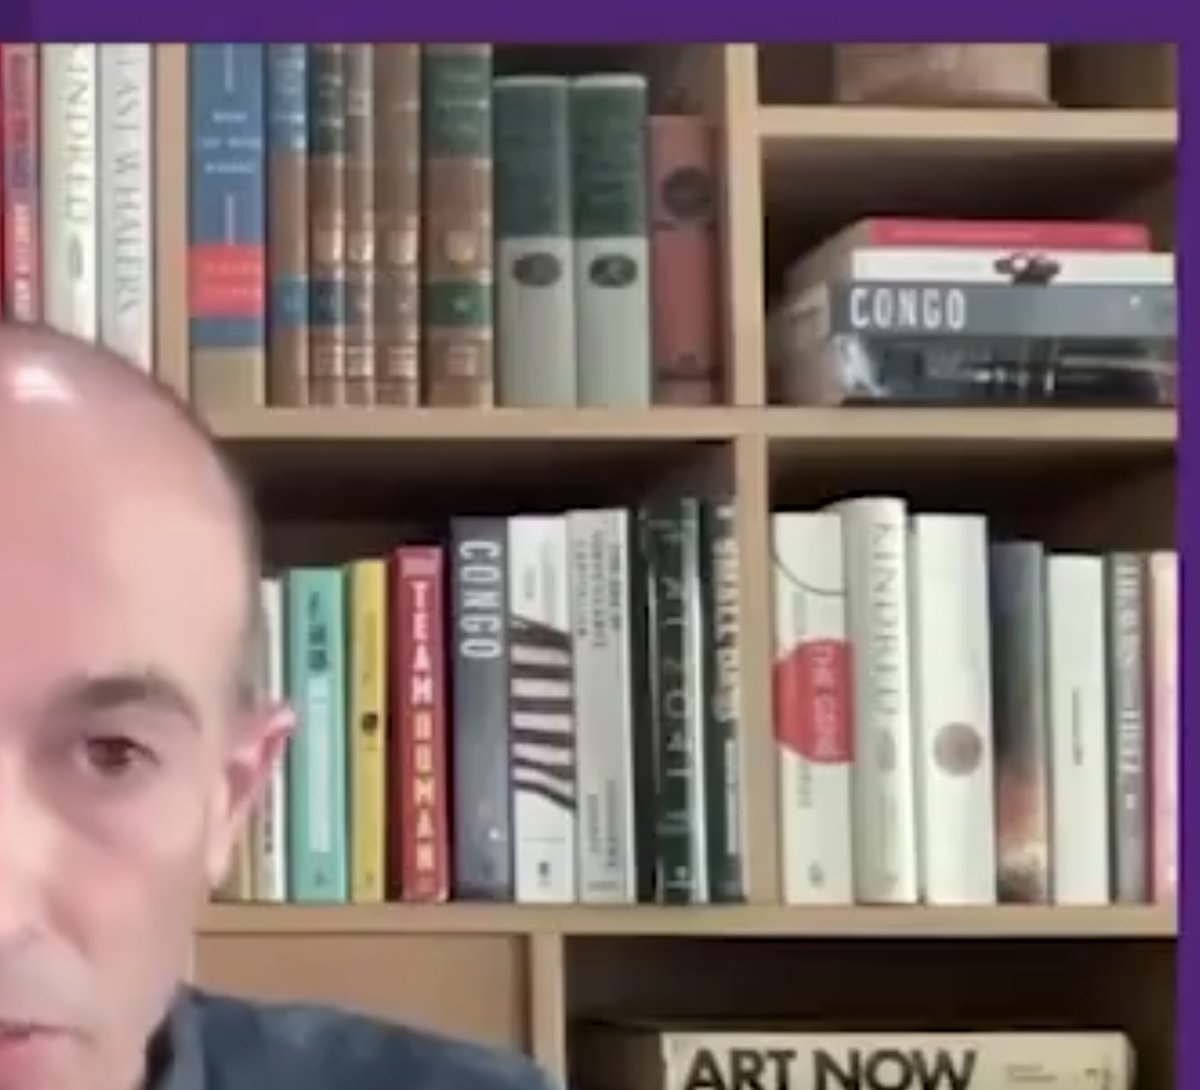 @ronin21btc 2x copies of 'Congo : The Epic History of a People
Van Reybrouck', 2x copies of 'Kindred: Neanderthal Life, Love, Death and Art, Rebecca Wragg' 

I can talk in front of a wall of books to make myself look clever too @harari_yuval